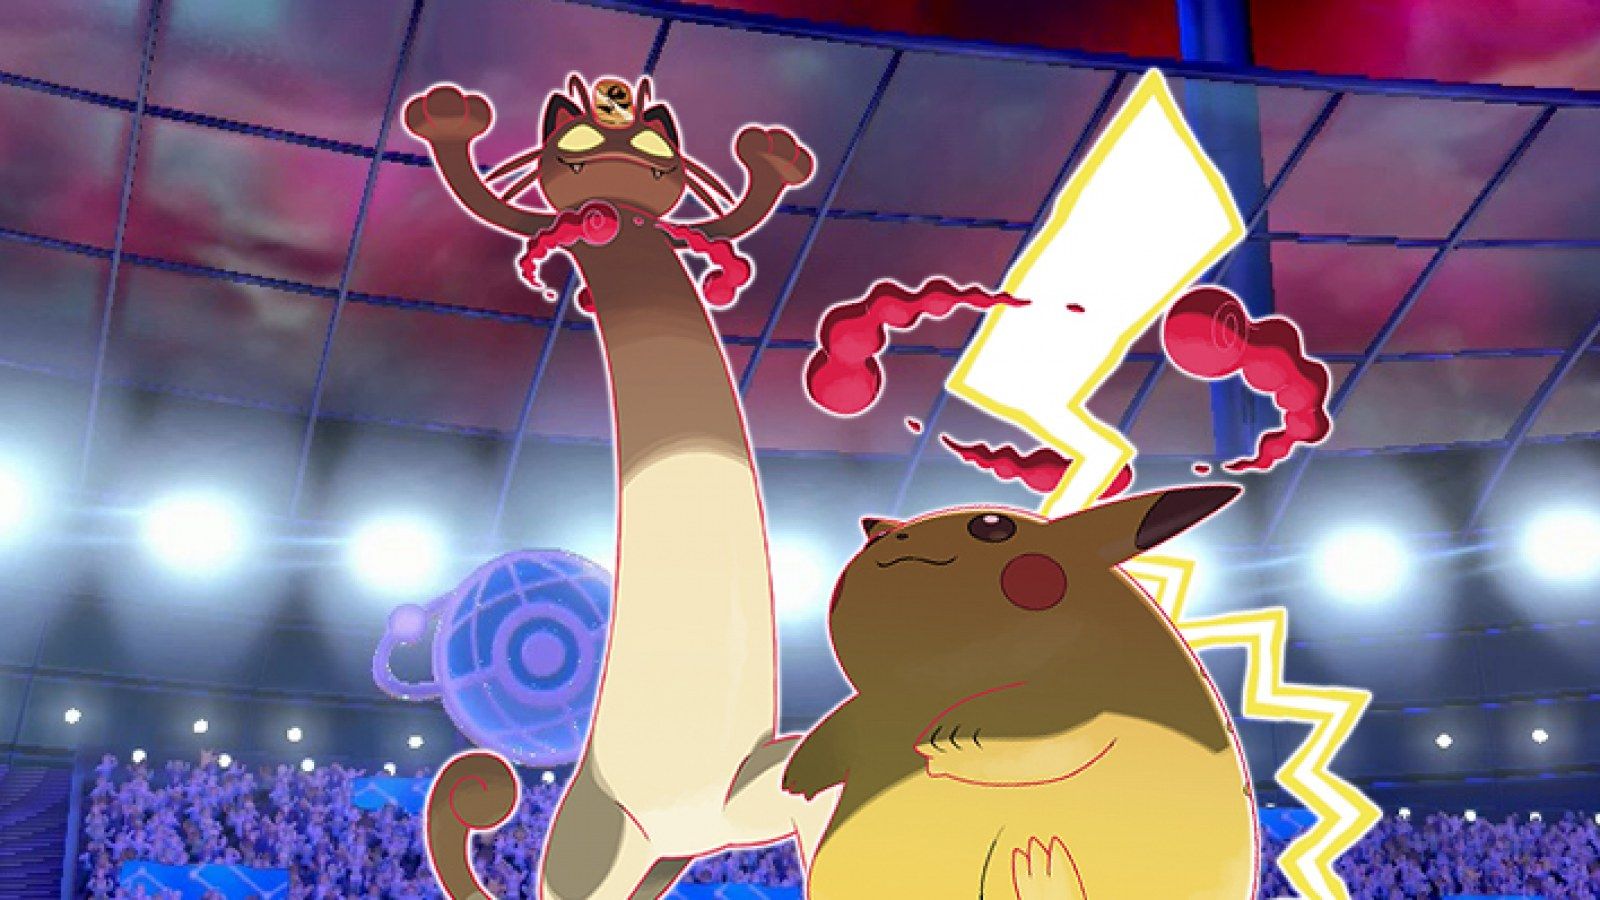 Gigantamax Meowth and Pikachu Were in that One 'Pokémon Sword